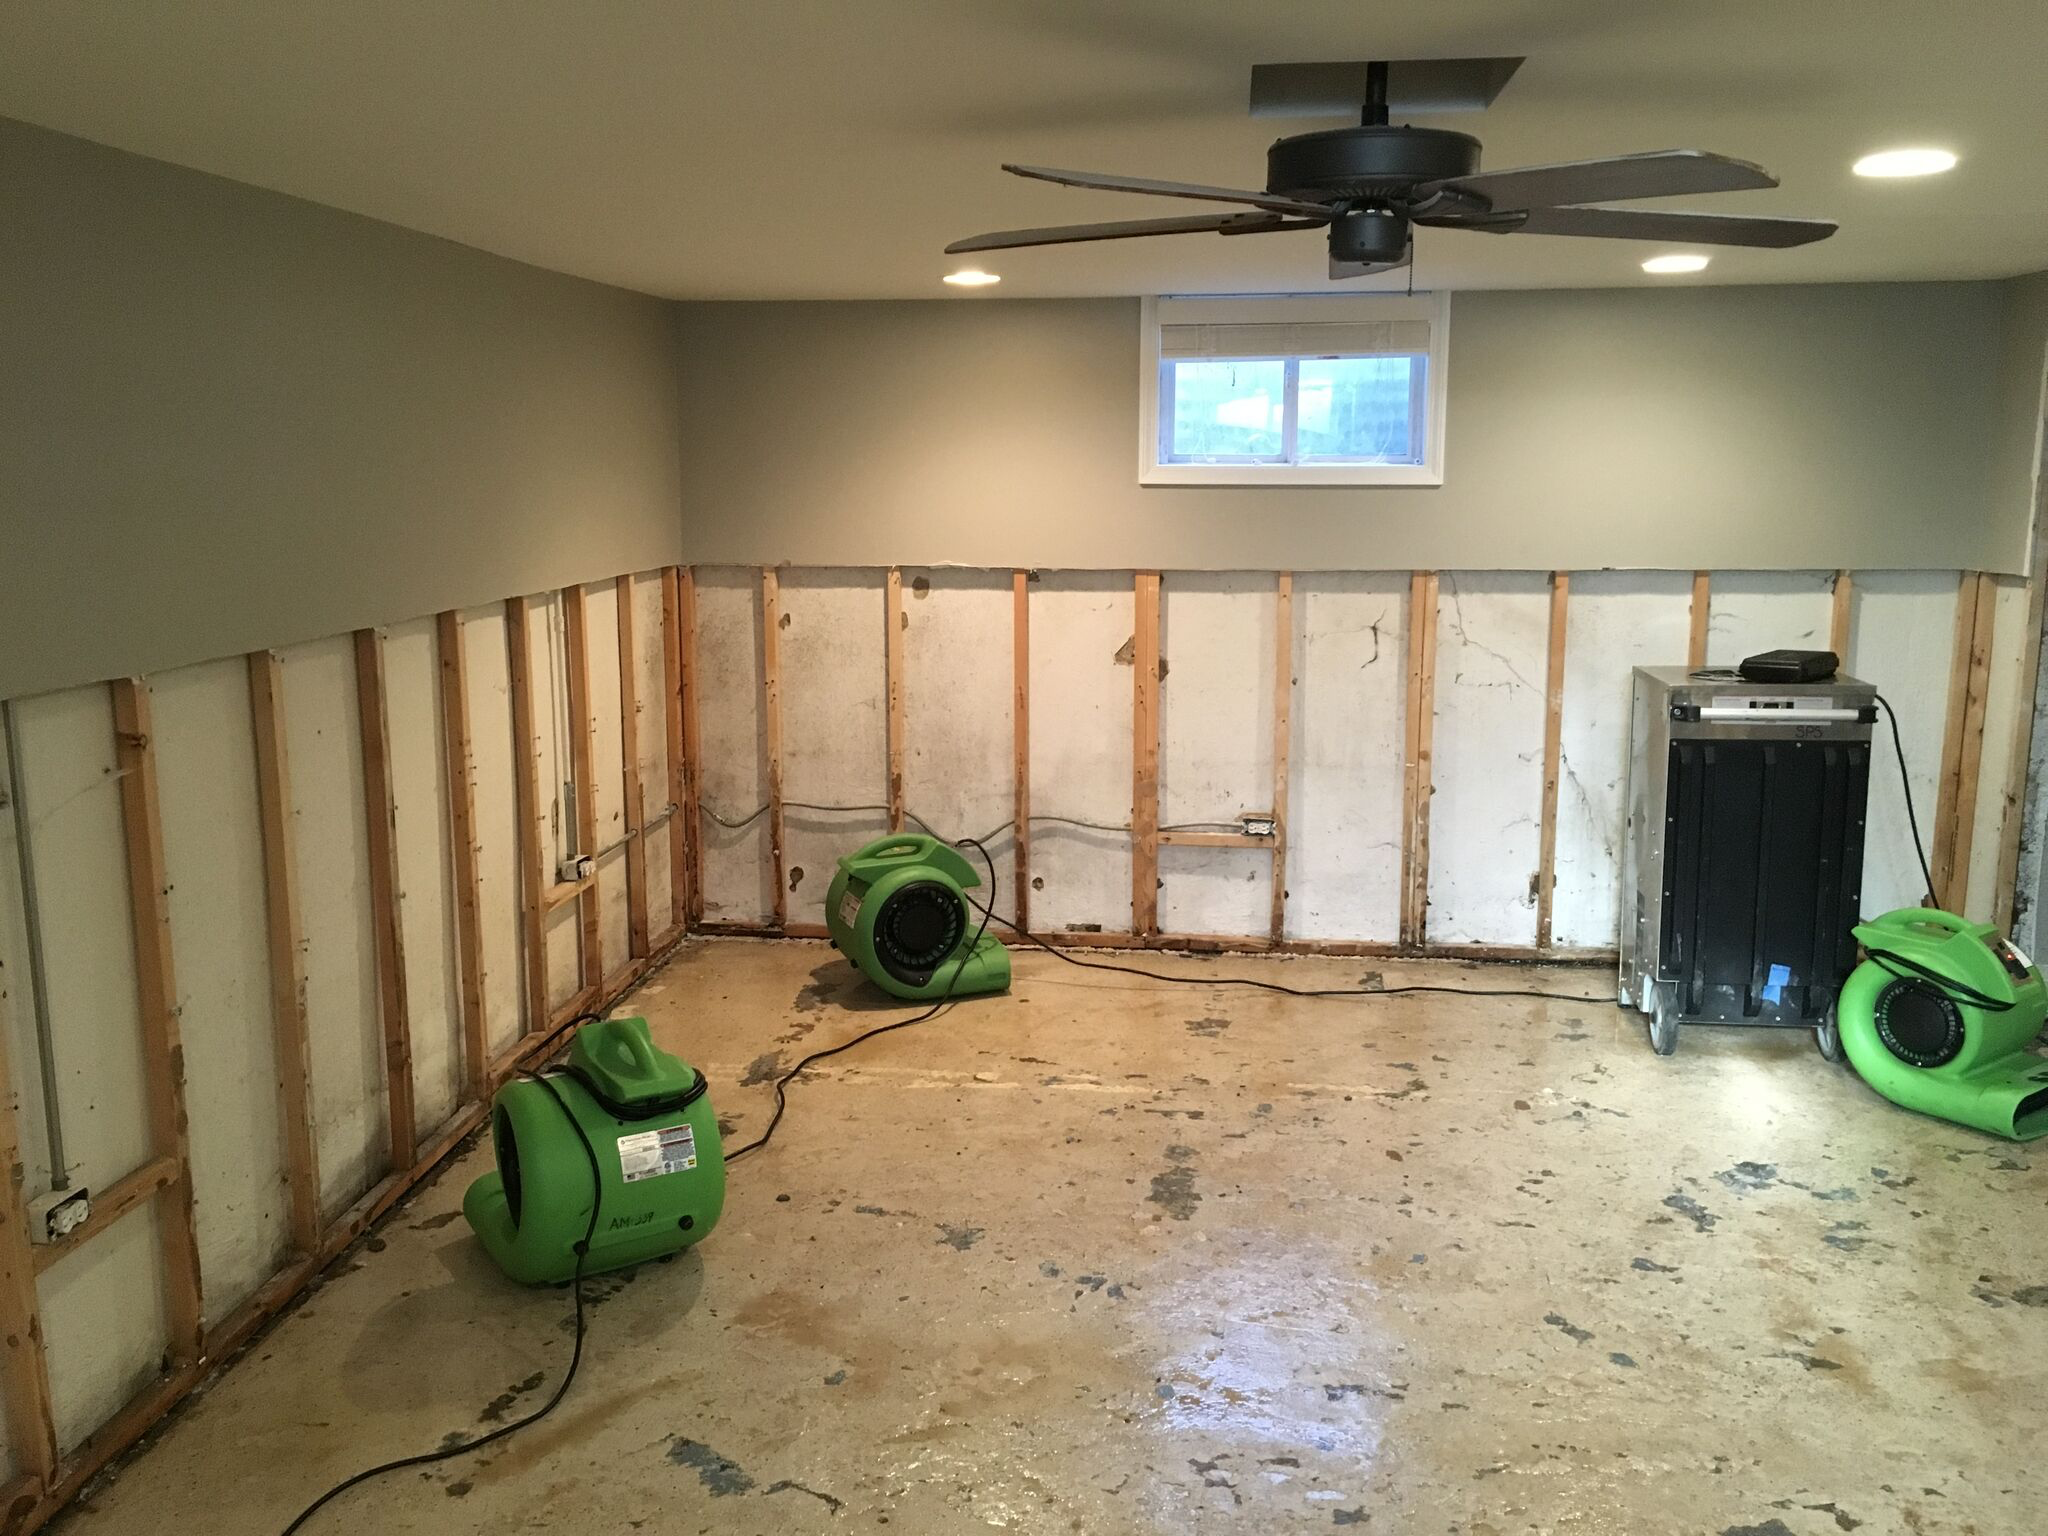 No size loss is too large for our SERVPRO team to handle!